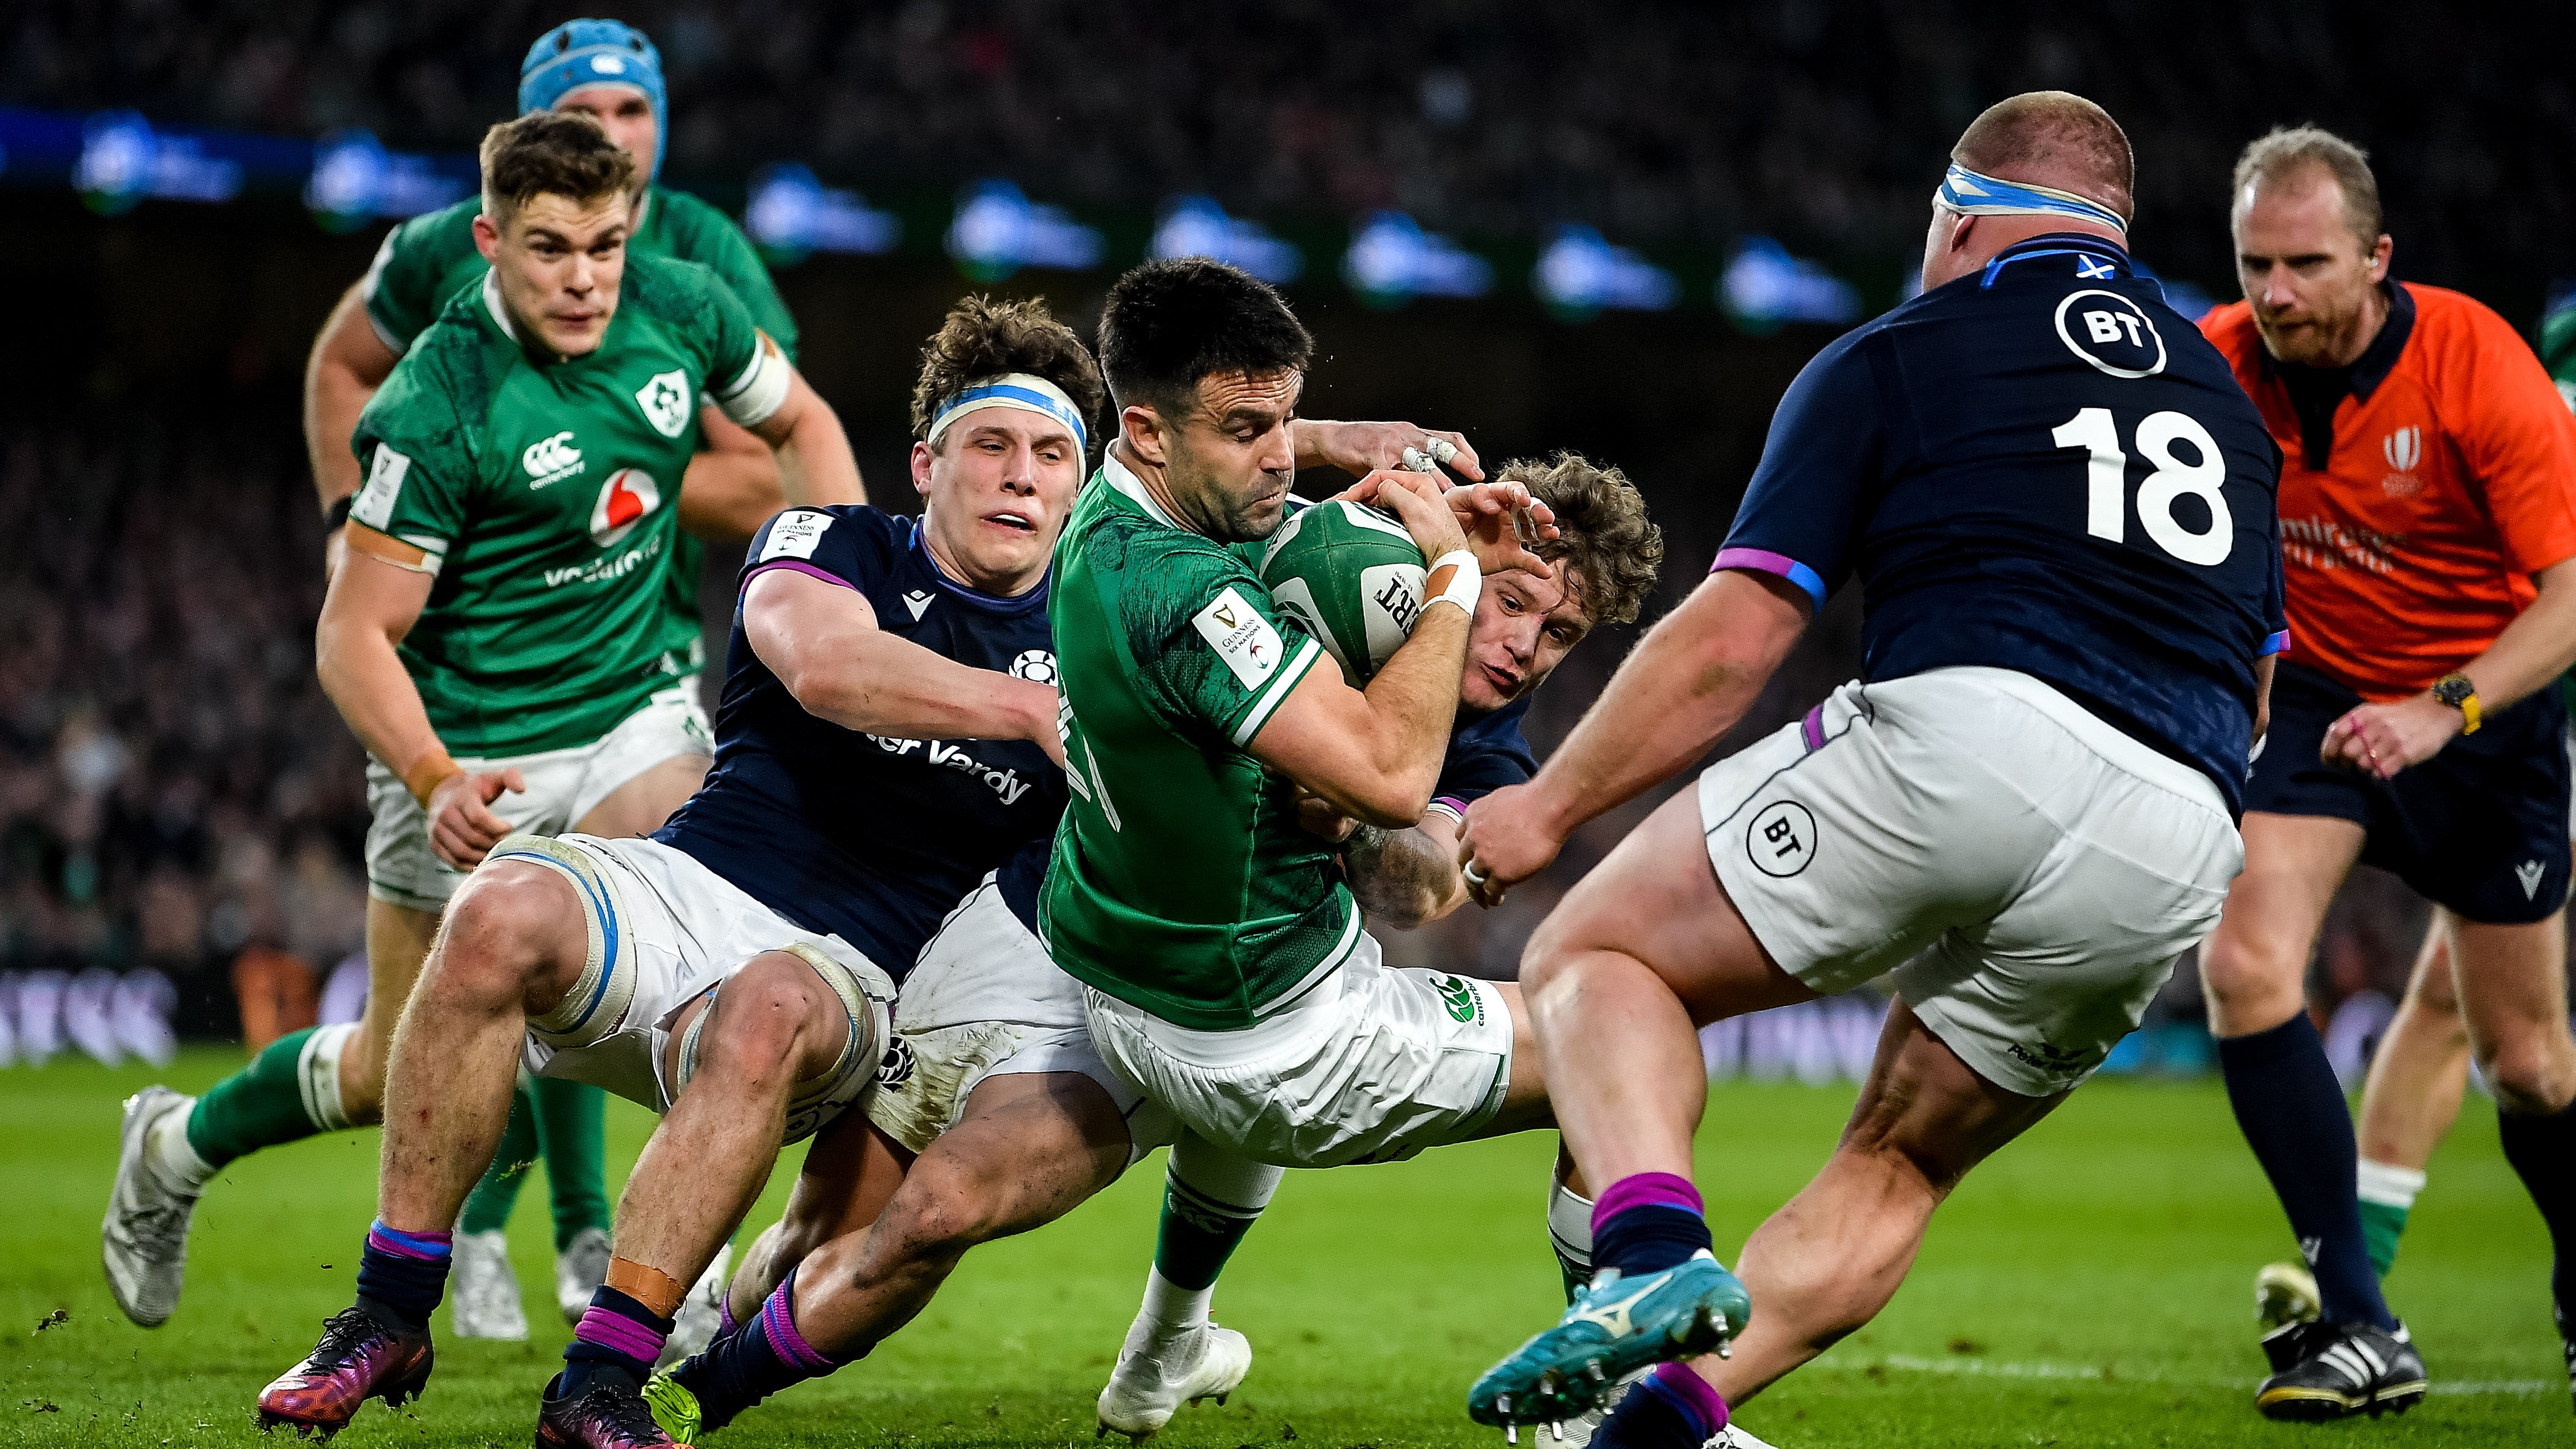 Scotland vs Ireland live stream how to watch the Six Nations game online today TechRadar